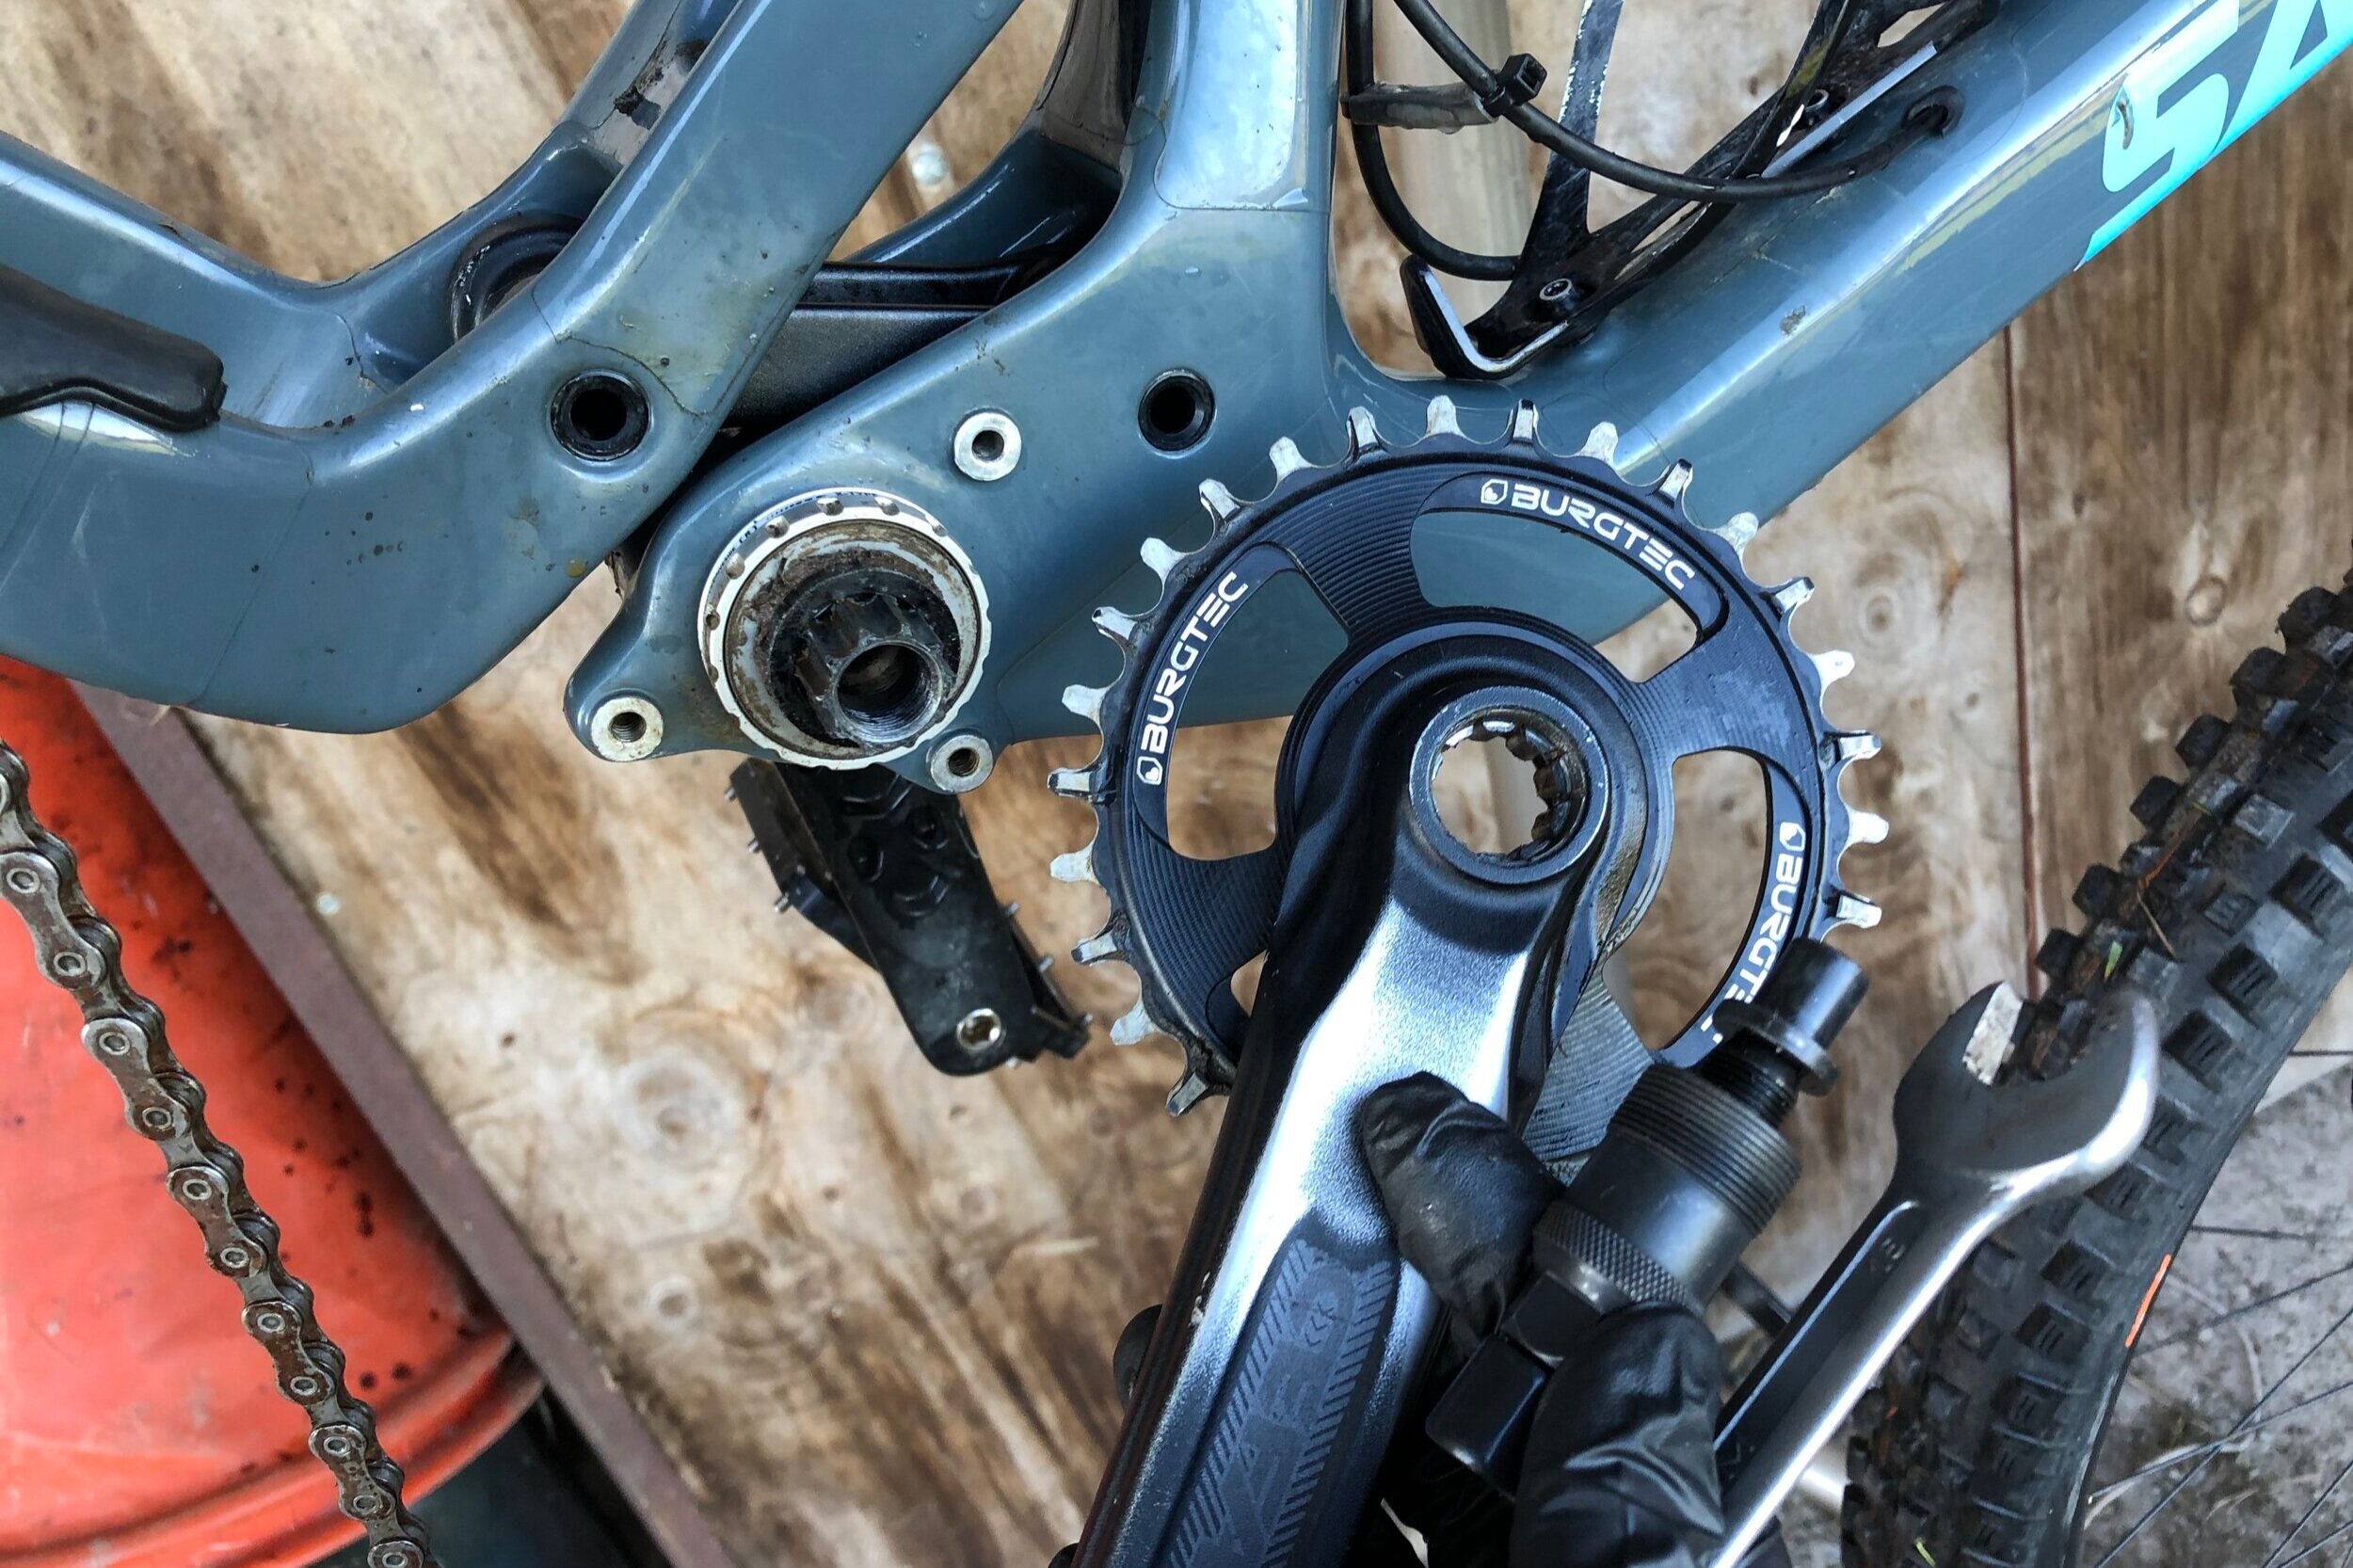 bicycle crank removal